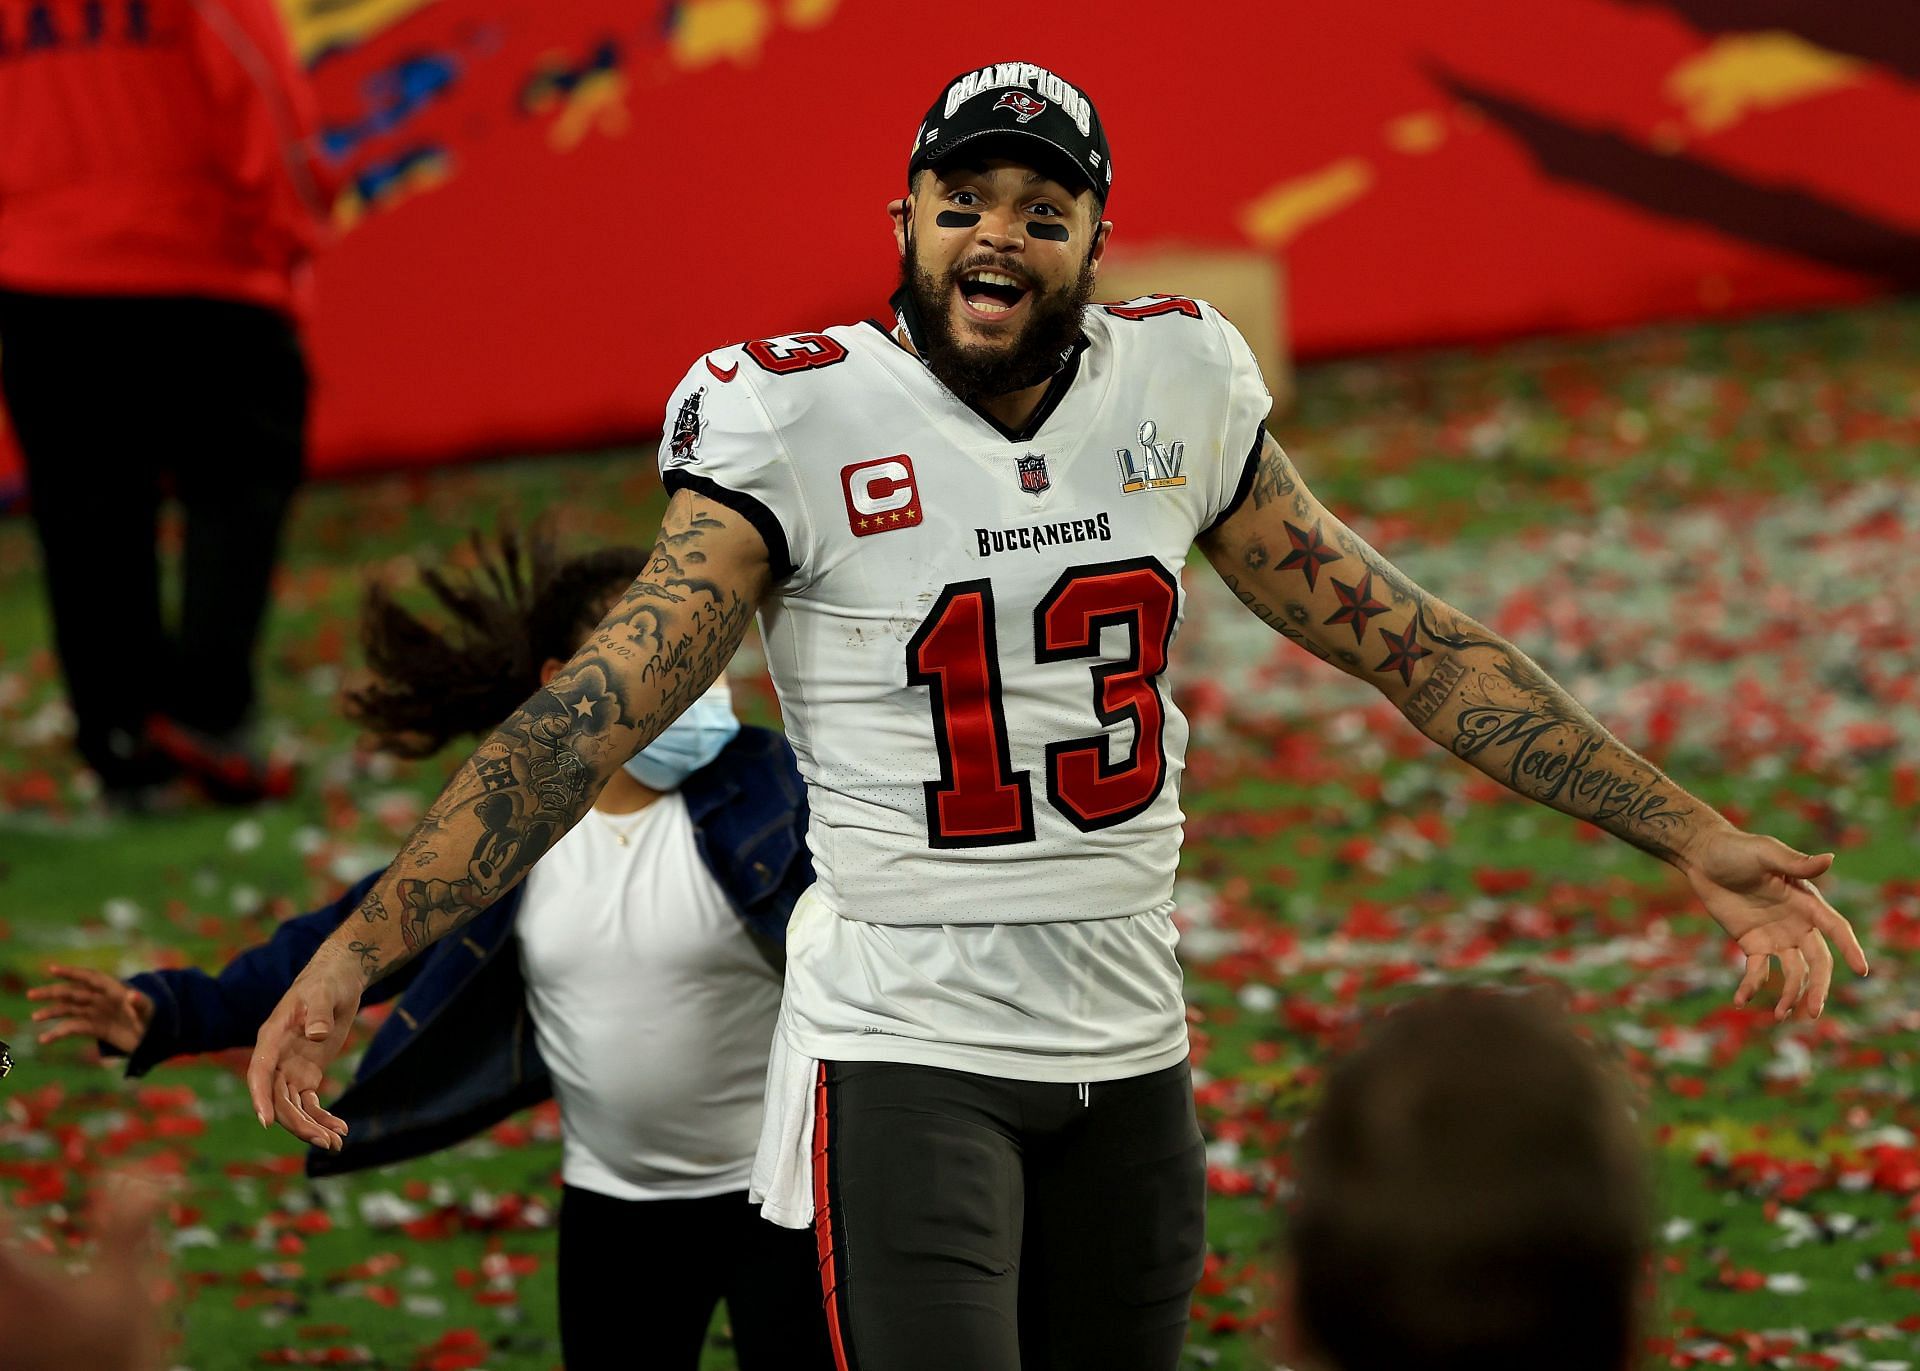 Mike Evans won Super Bowl LV with the Tampa Bay Buccaneers.